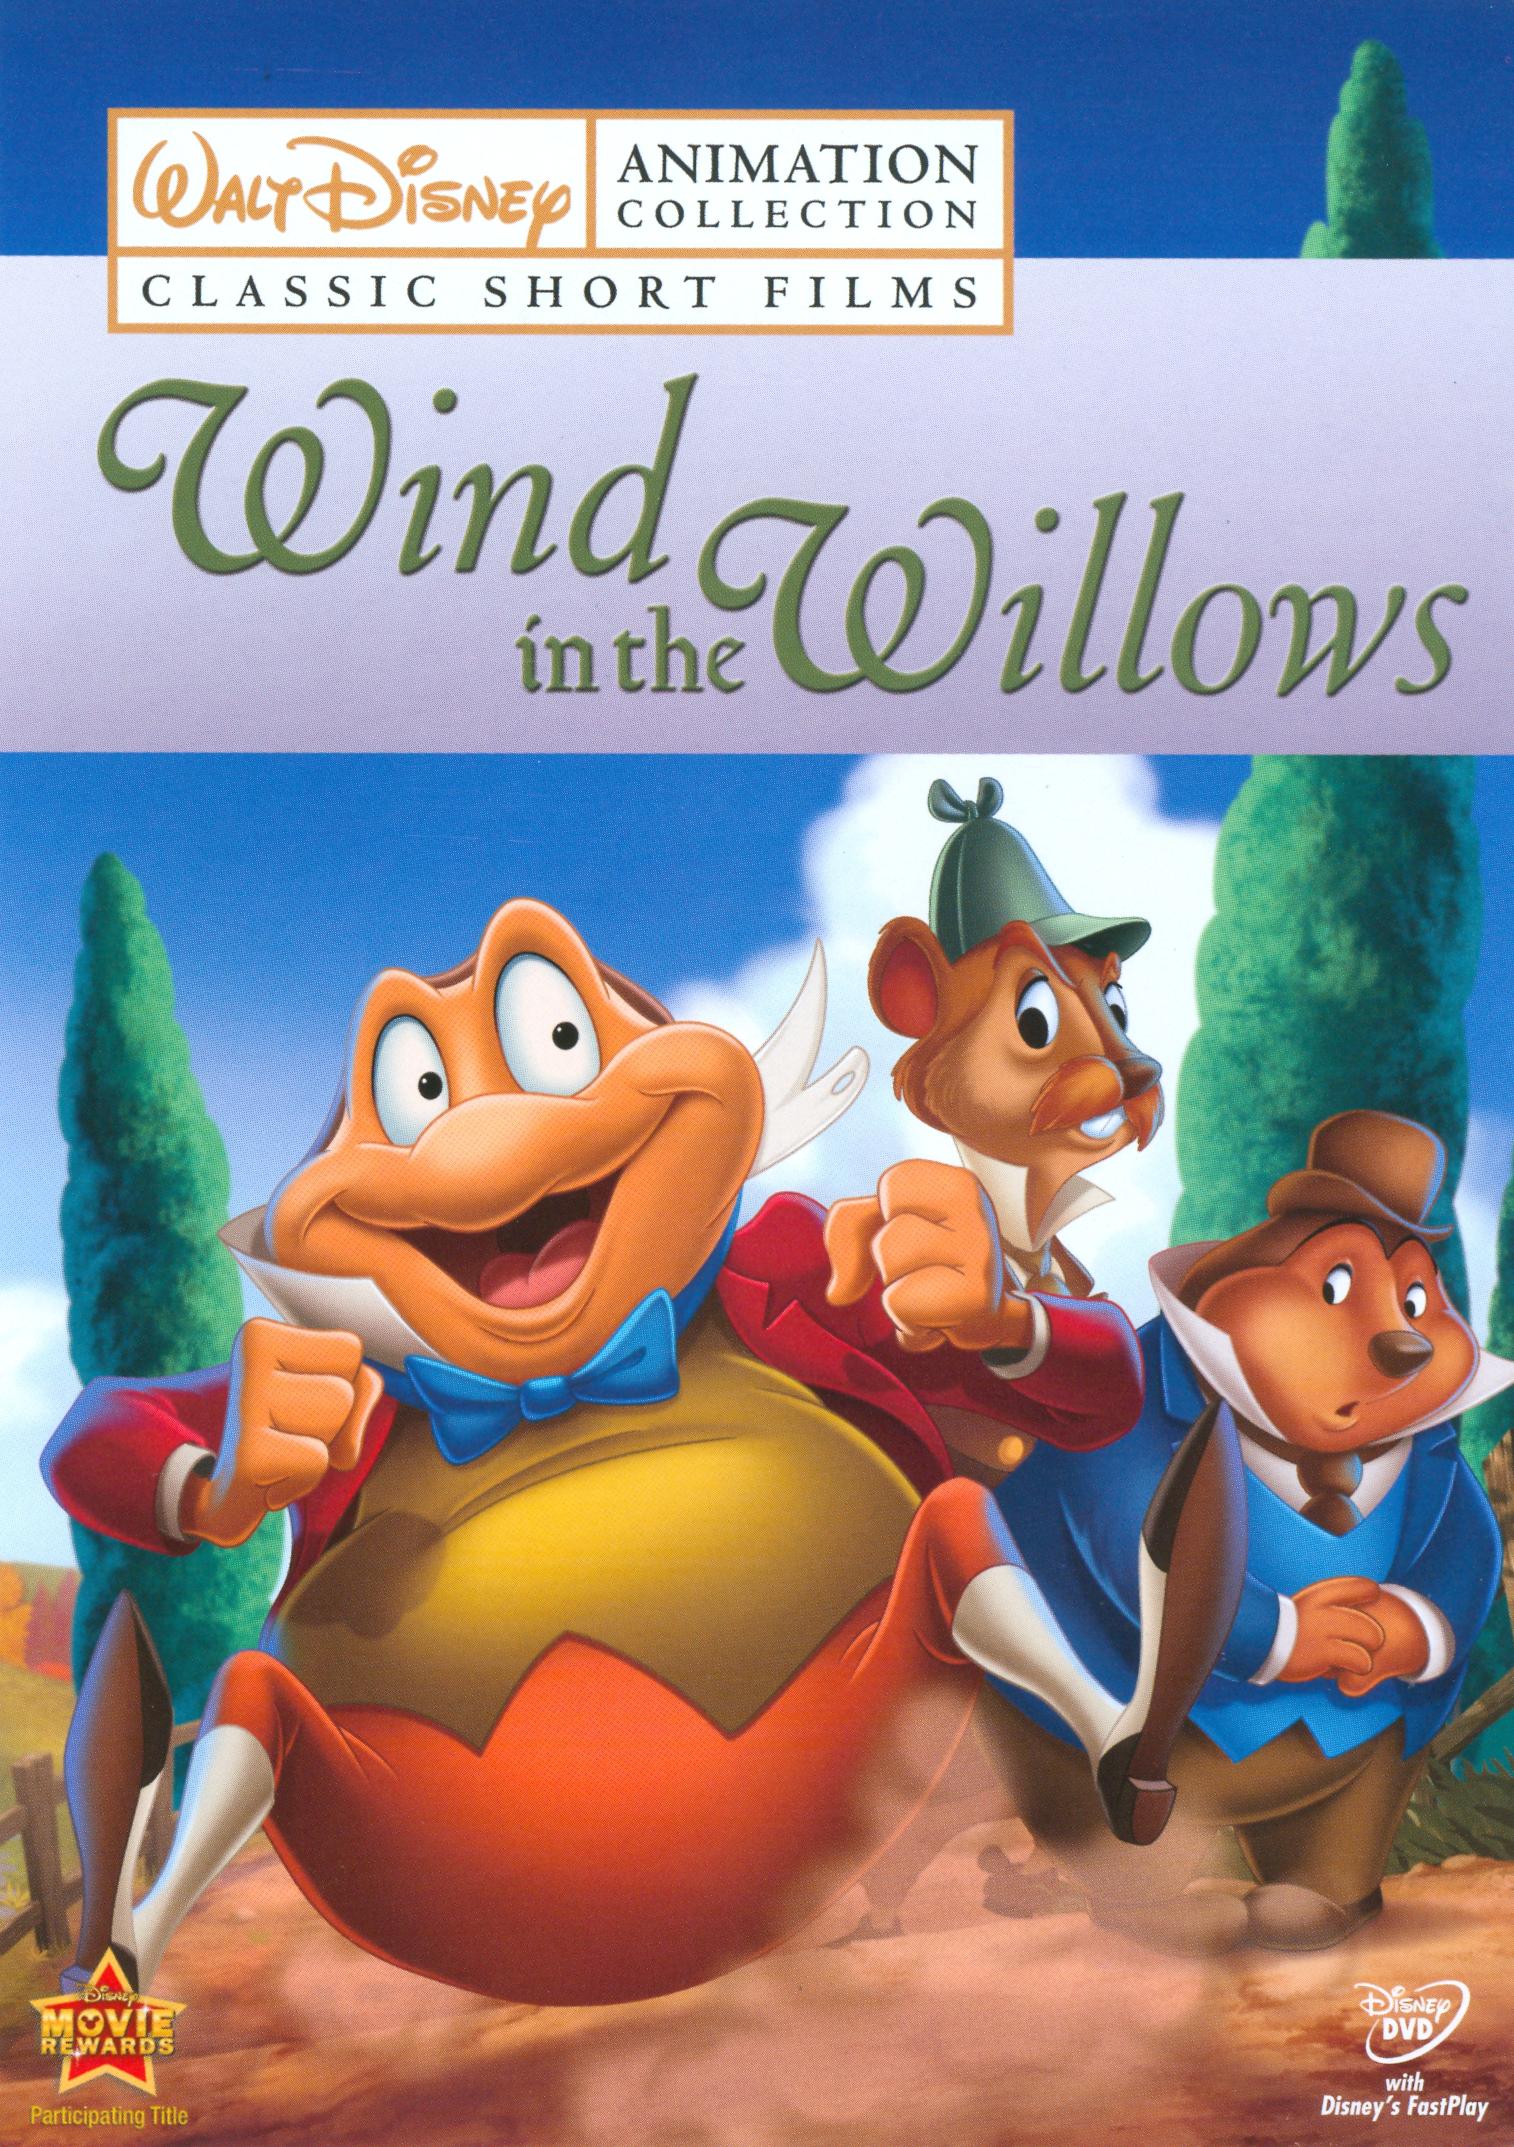 Walt Disney Animation Collection: Classic Short Films, Vol. 5 The Wind in  the Willows [DVD] - Best Buy